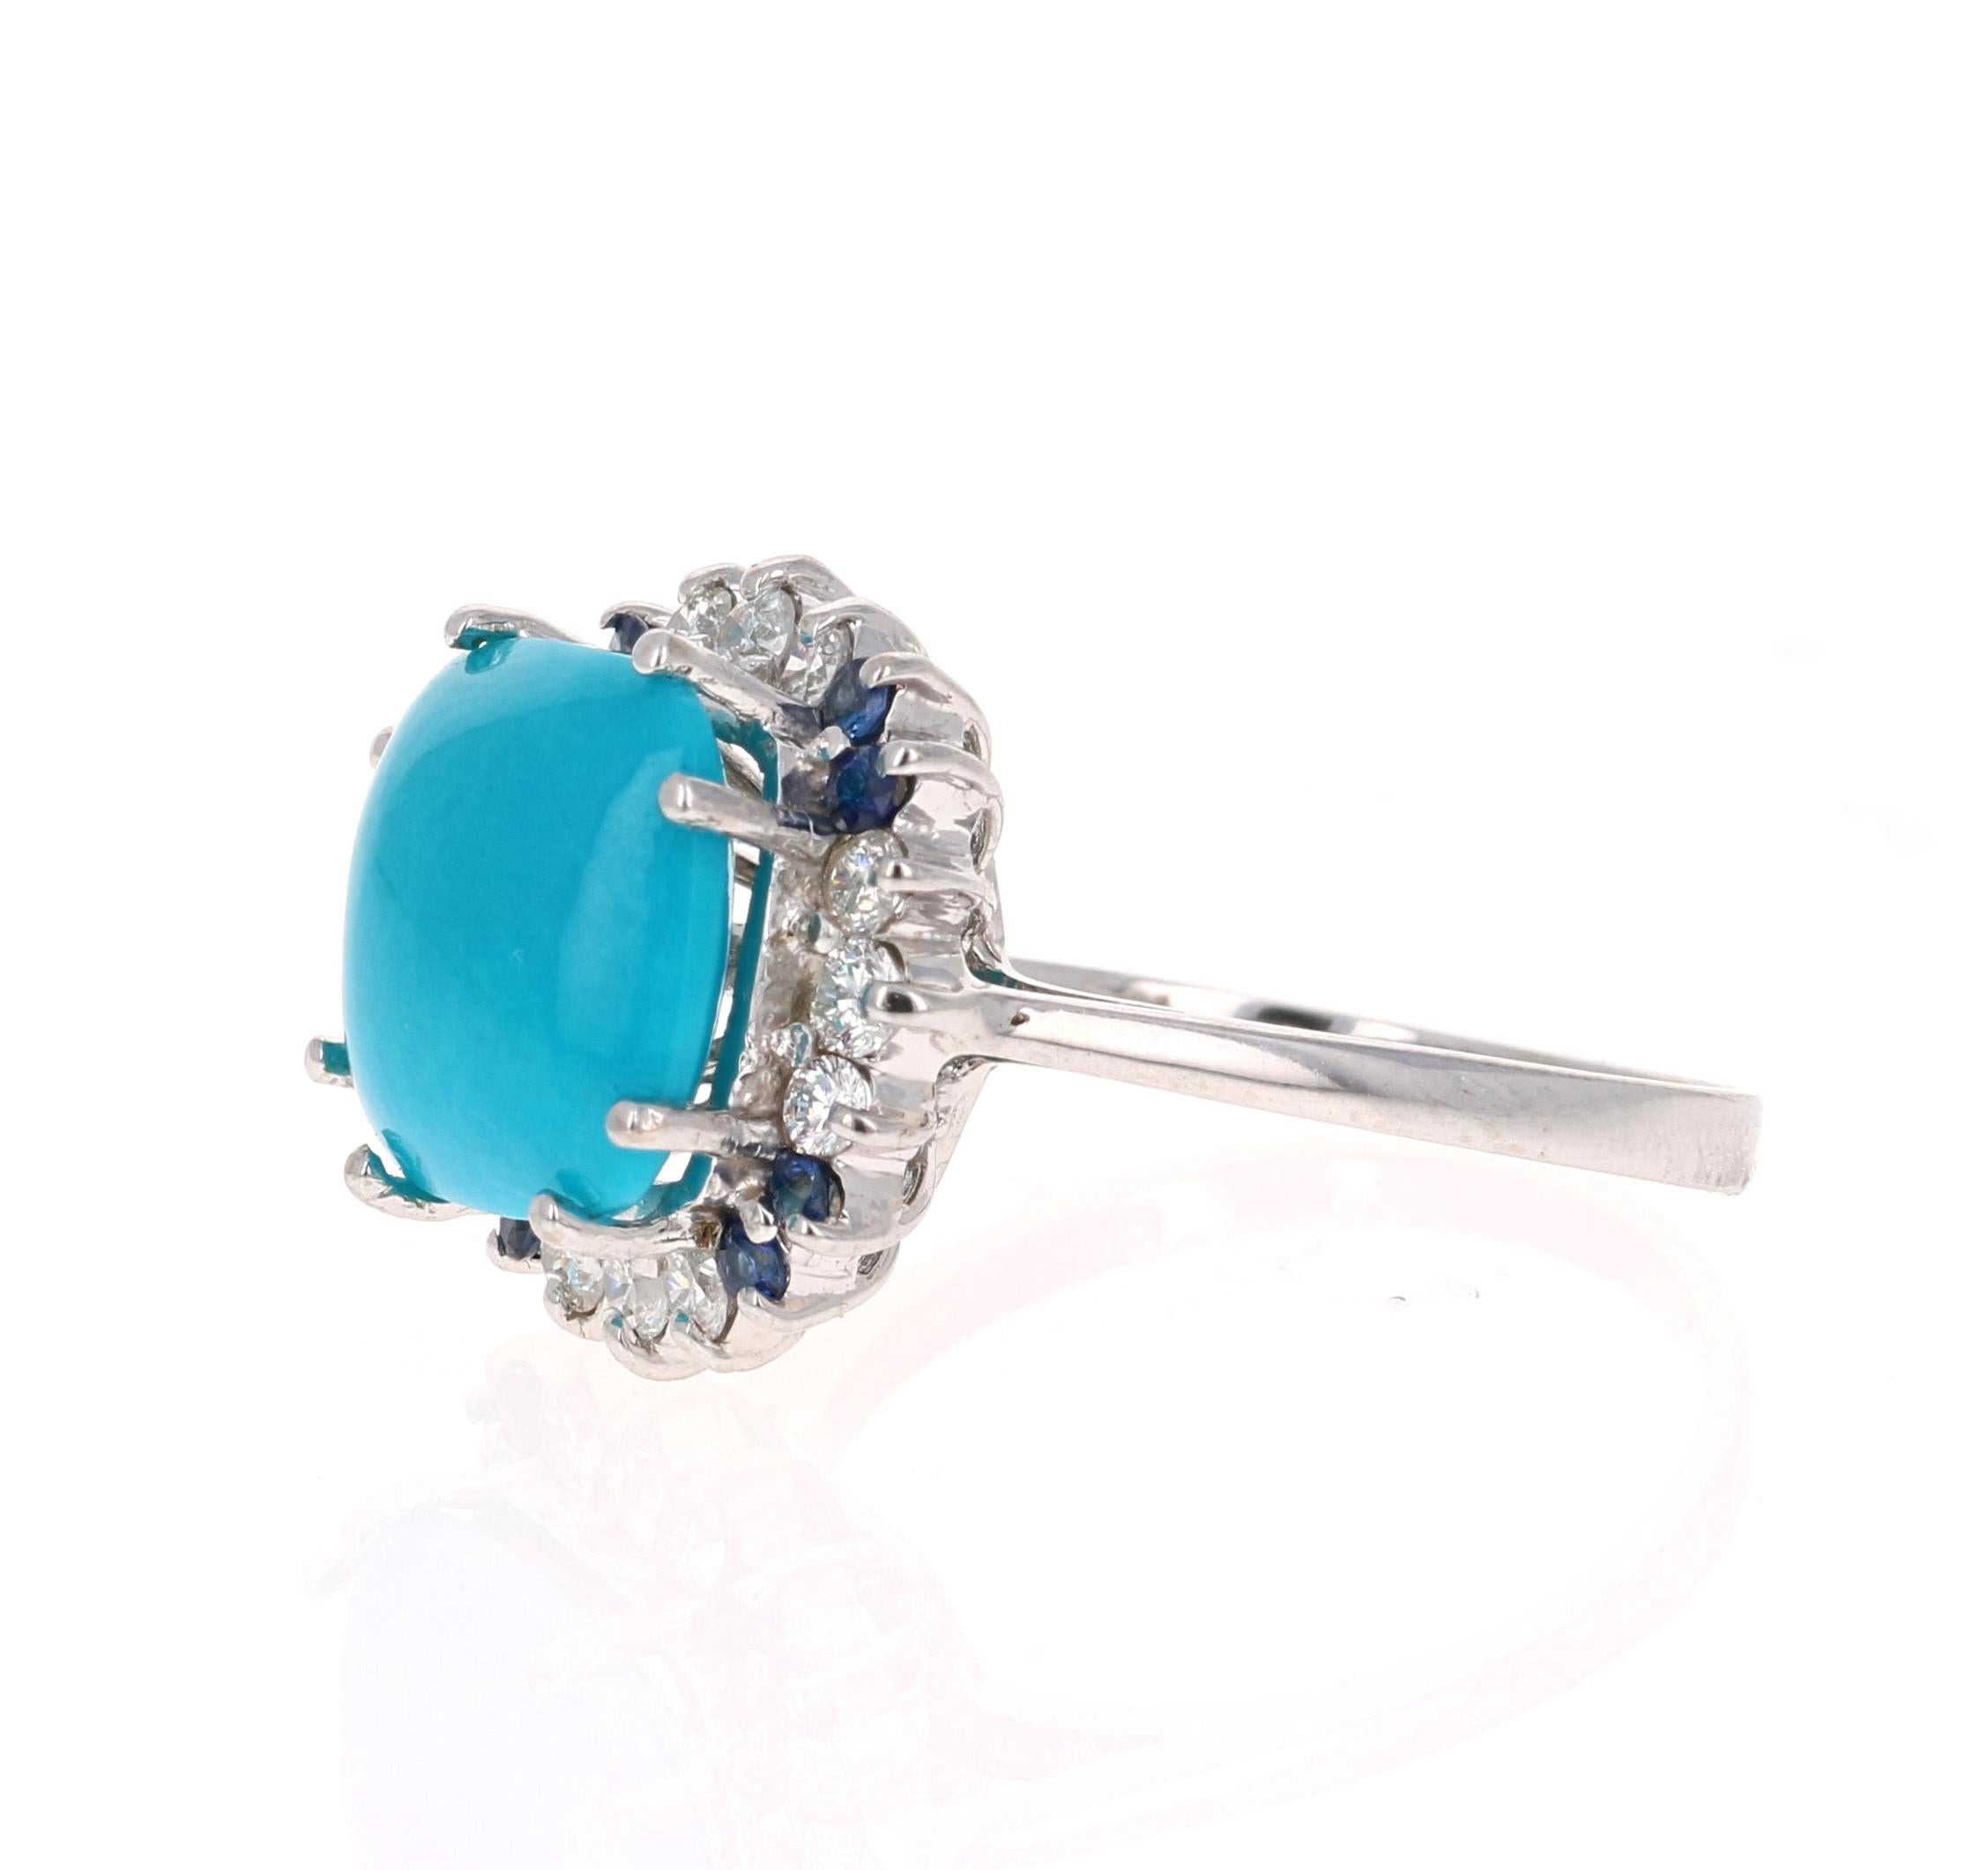 This is a unique beauty! 

The Square/Cushion Cut Turquoise is 5.00 Carats and is surrounded by a cluster of beautifully set diamonds and sapphires. There are 12 Round Cut Diamonds that weigh 0.52 Carats and 8 Round Cut Sapphires that weigh 0.21